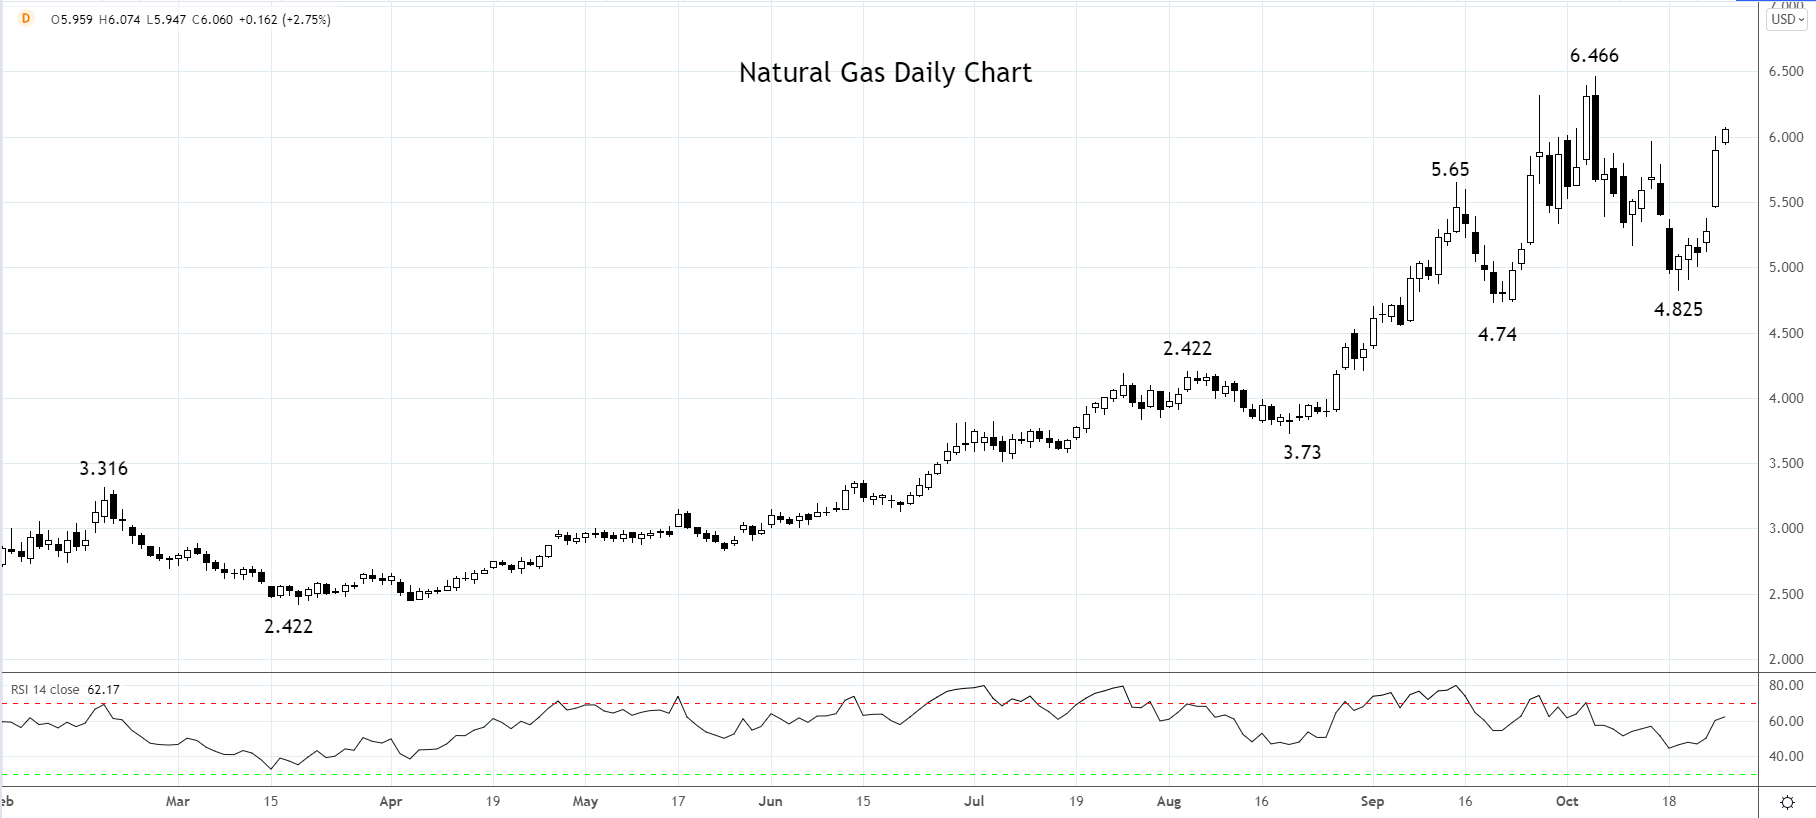 Natural Gas Daily chart 26th of October